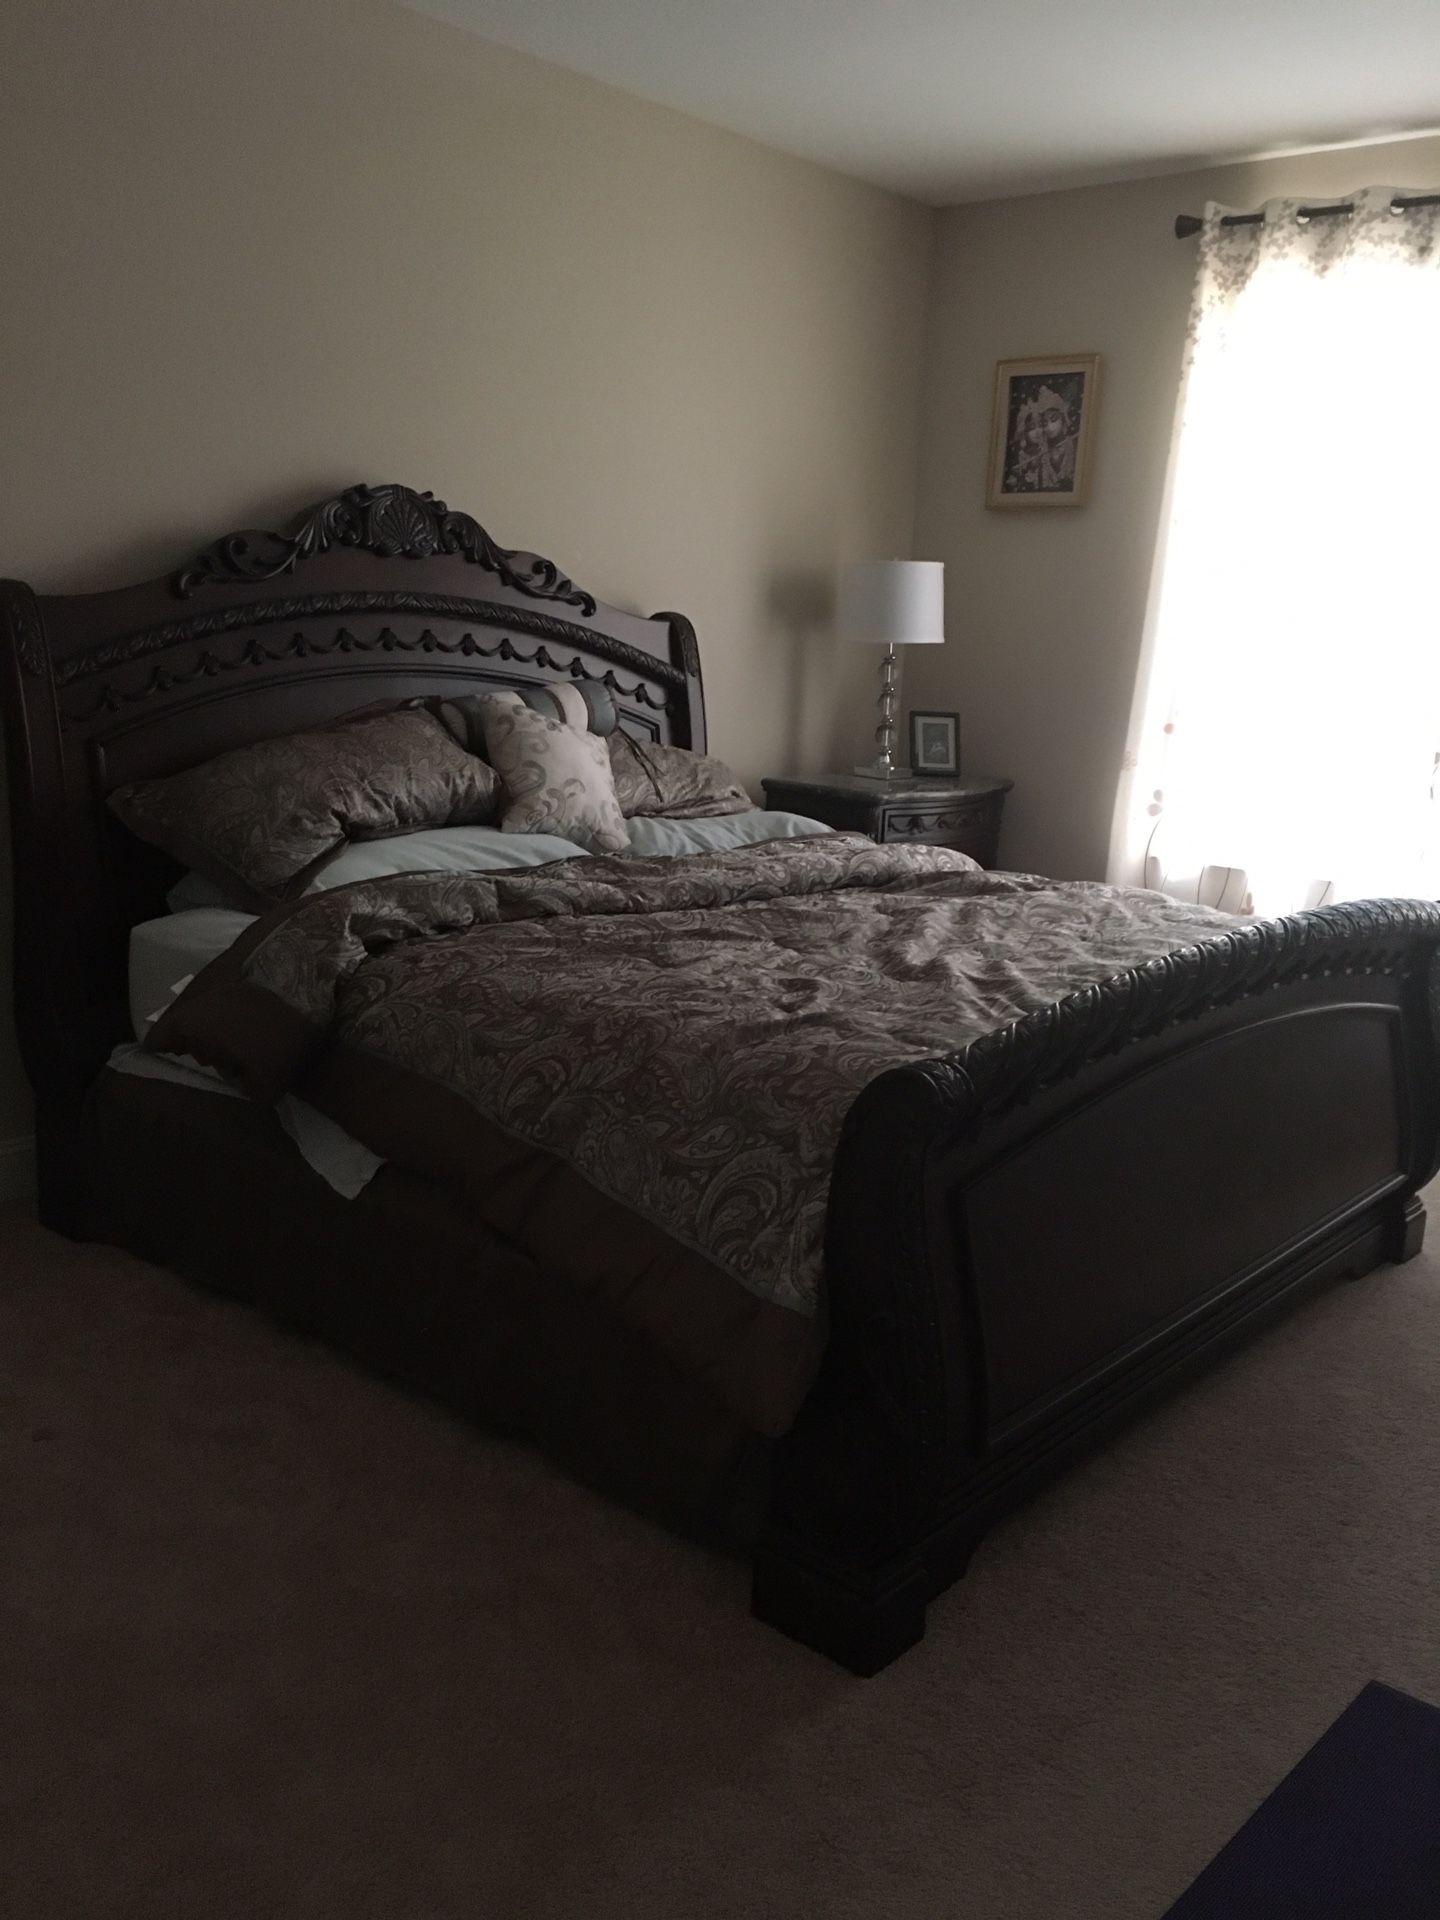 New King size Bed room set with mattress and box spring